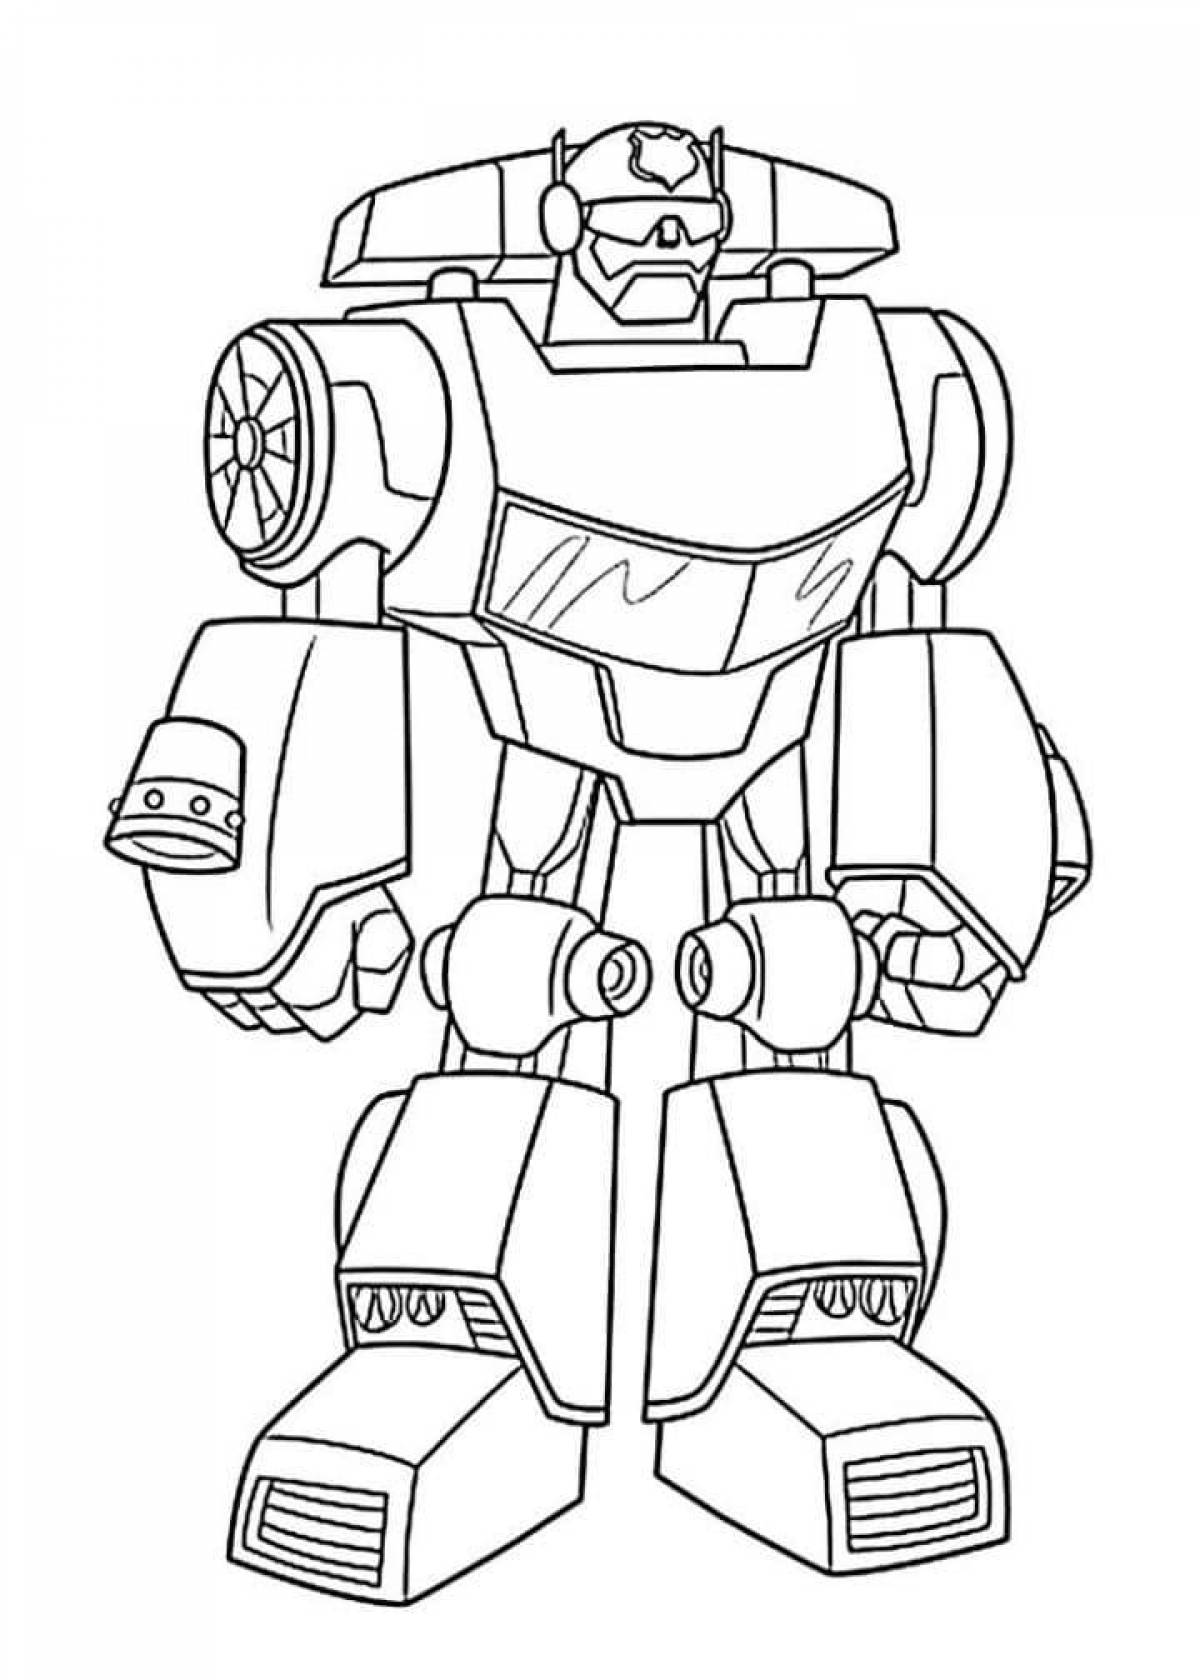 Colorful and vibrant robot coloring page for boys